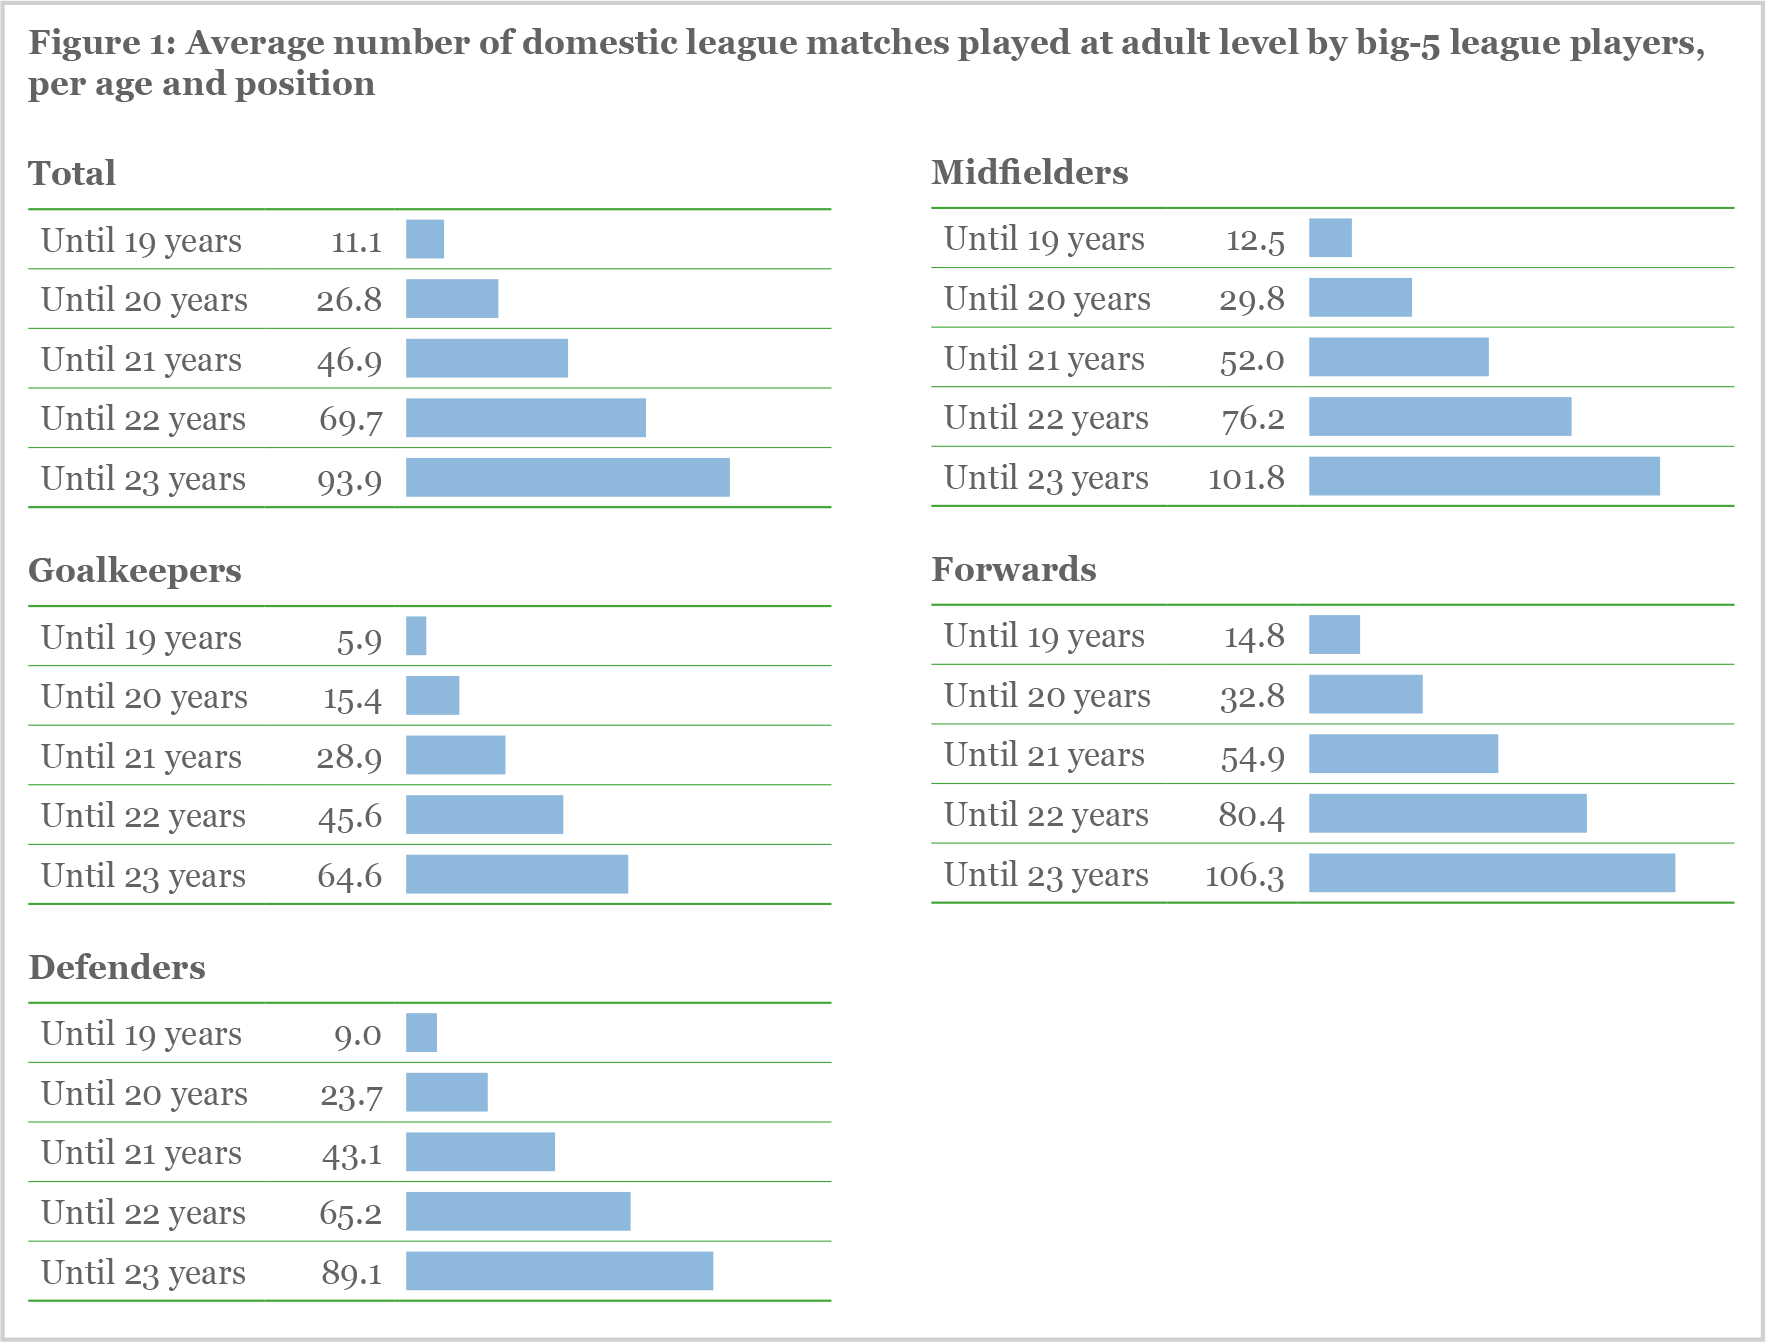 Figure 1: Average number of domestic league matches played at adult level by big-5 league players, per age and position